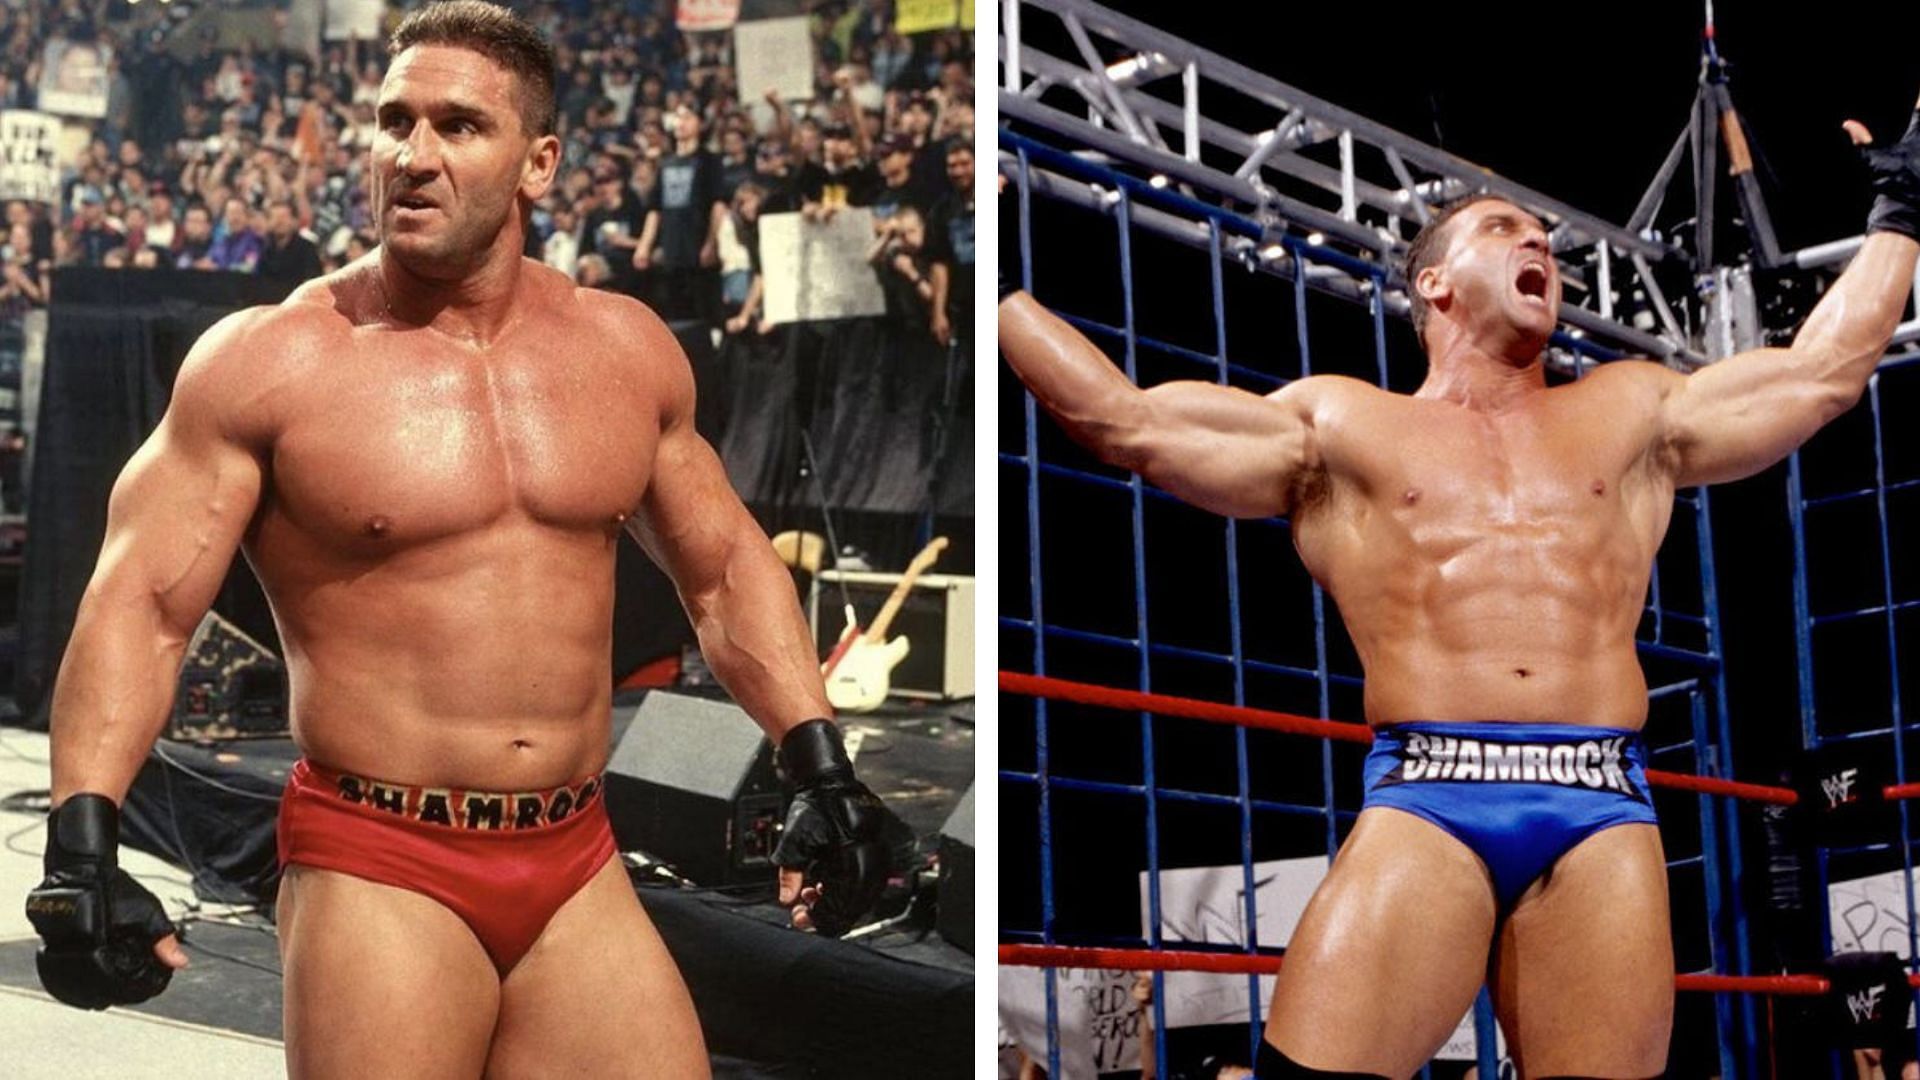 Ken Shamrock was signed to WWE for only a few years